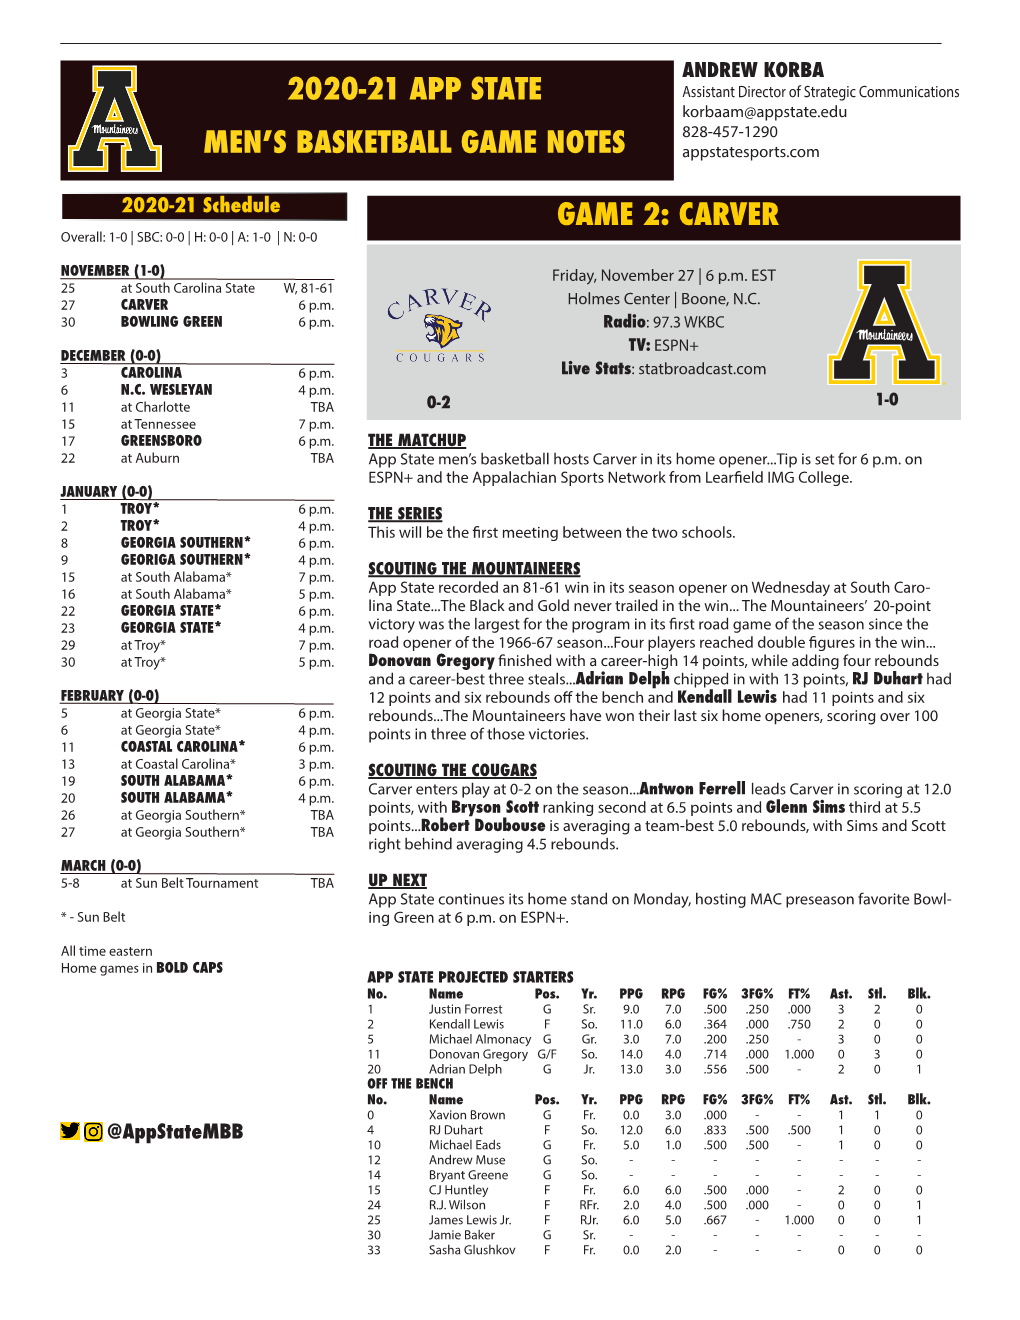 2020-21 App State Men's Basketball Game Notes